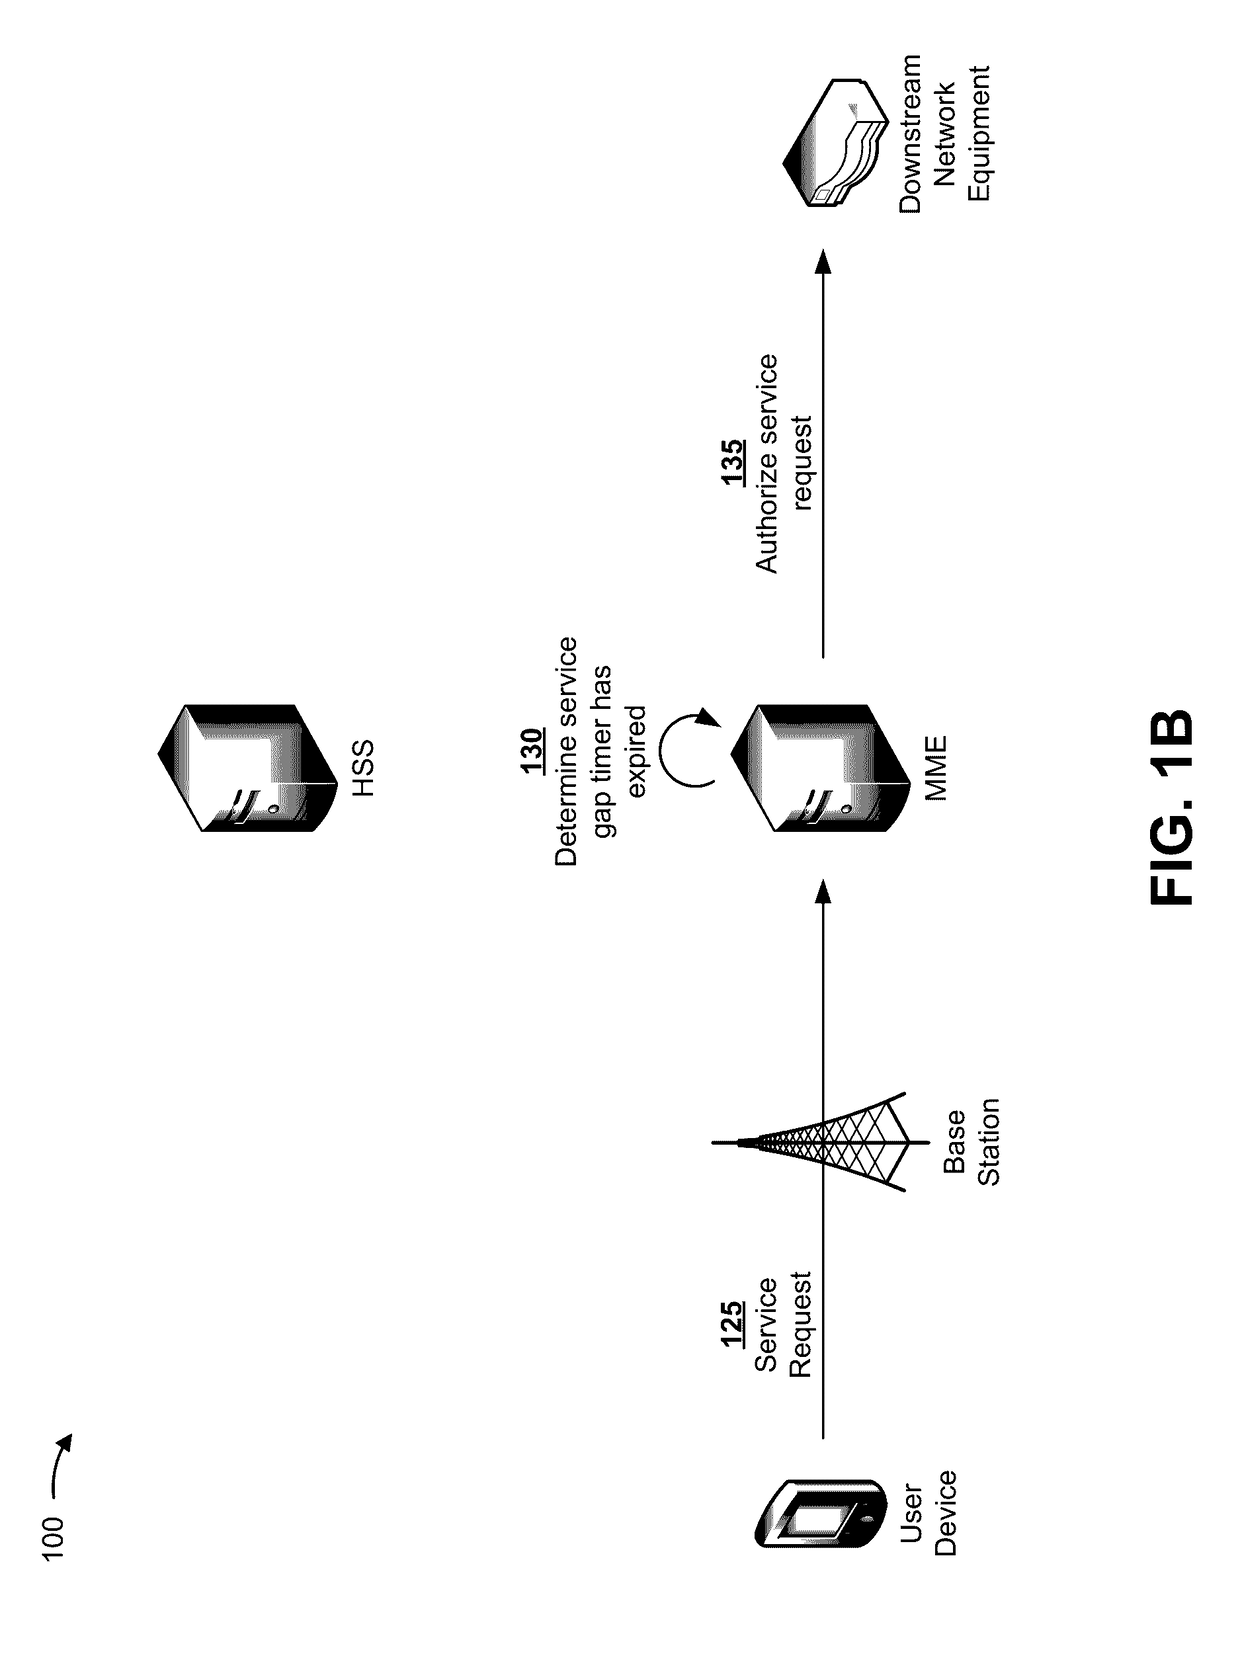 Controlling frequency of user device access to a network